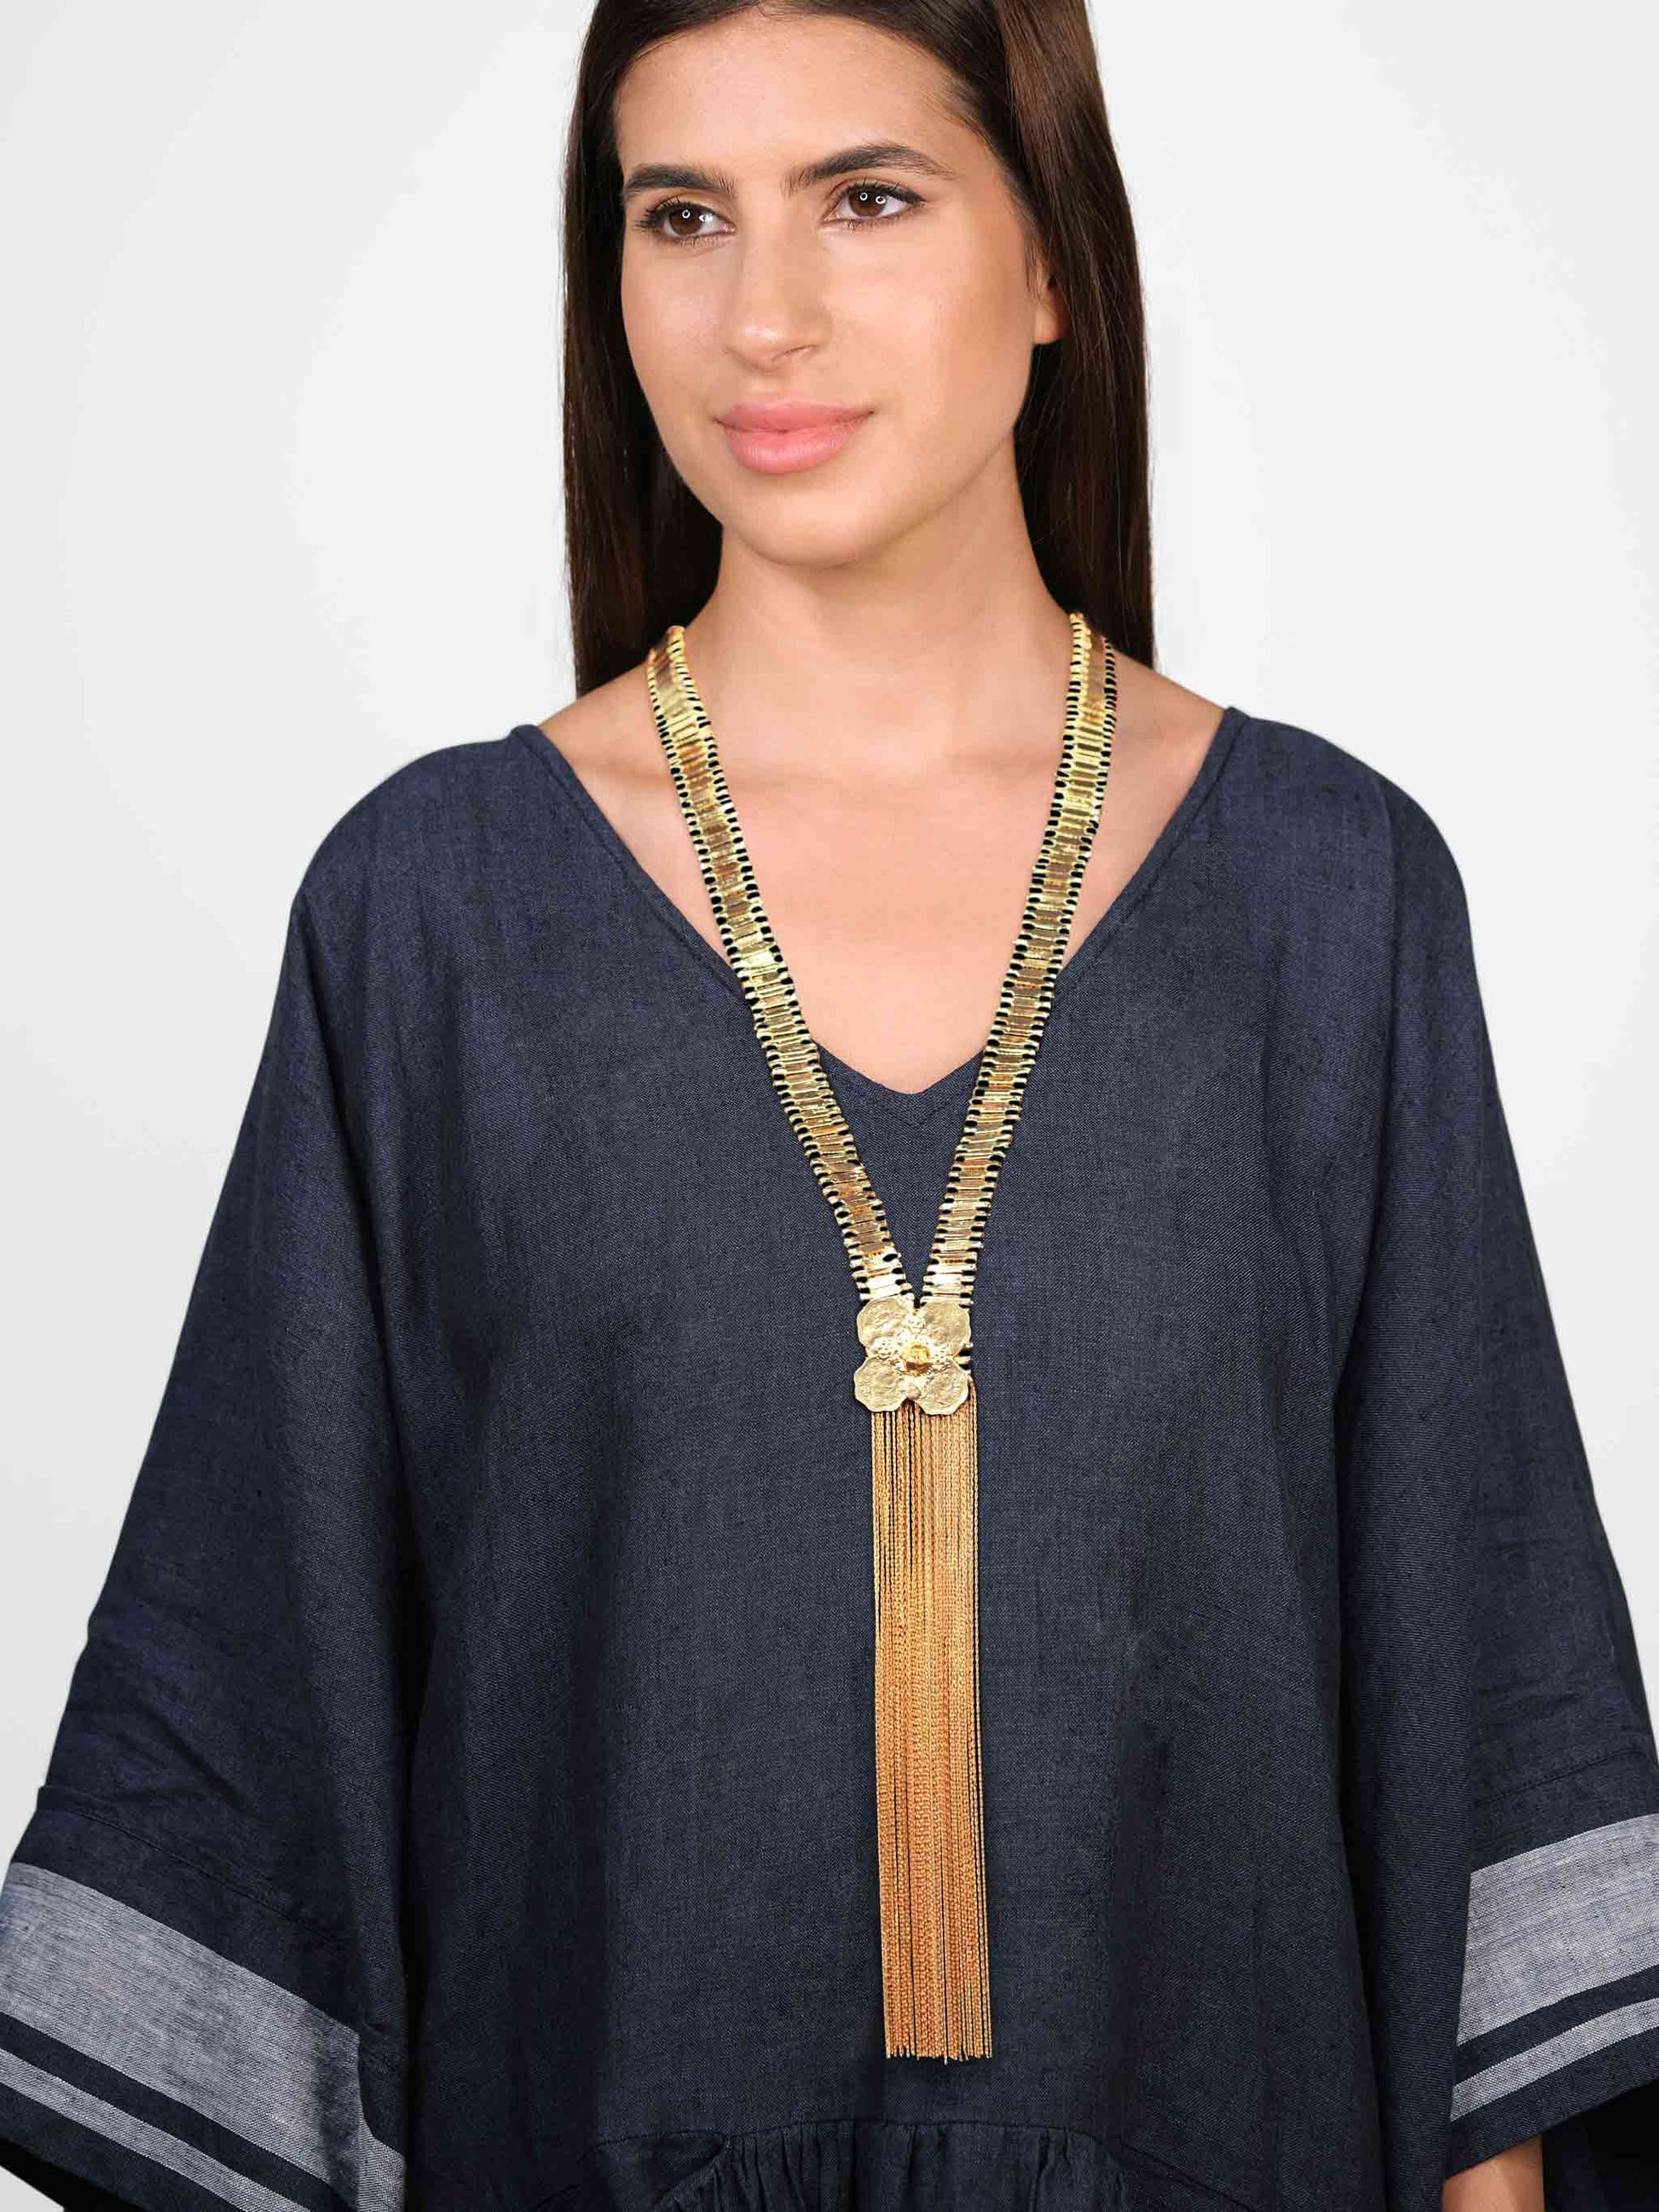 Lucky Goddess Flower Vermeil Chain Fringe Necklace with Black Cords